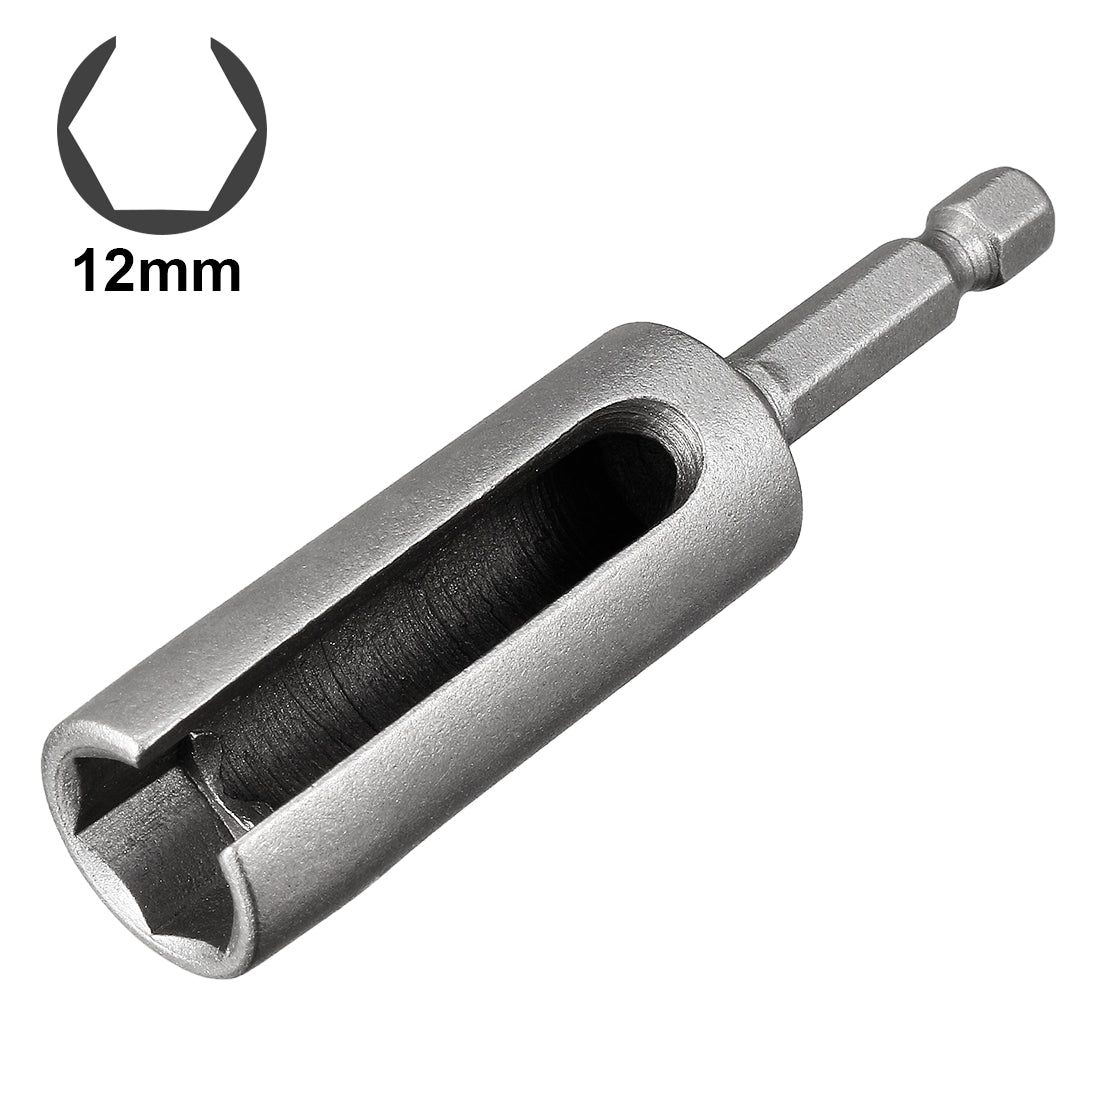 Uxcell Uxcell 1PCS 14mm CR-V Hex Nut Socket Slotted Extension Driver Bit 80mm Length